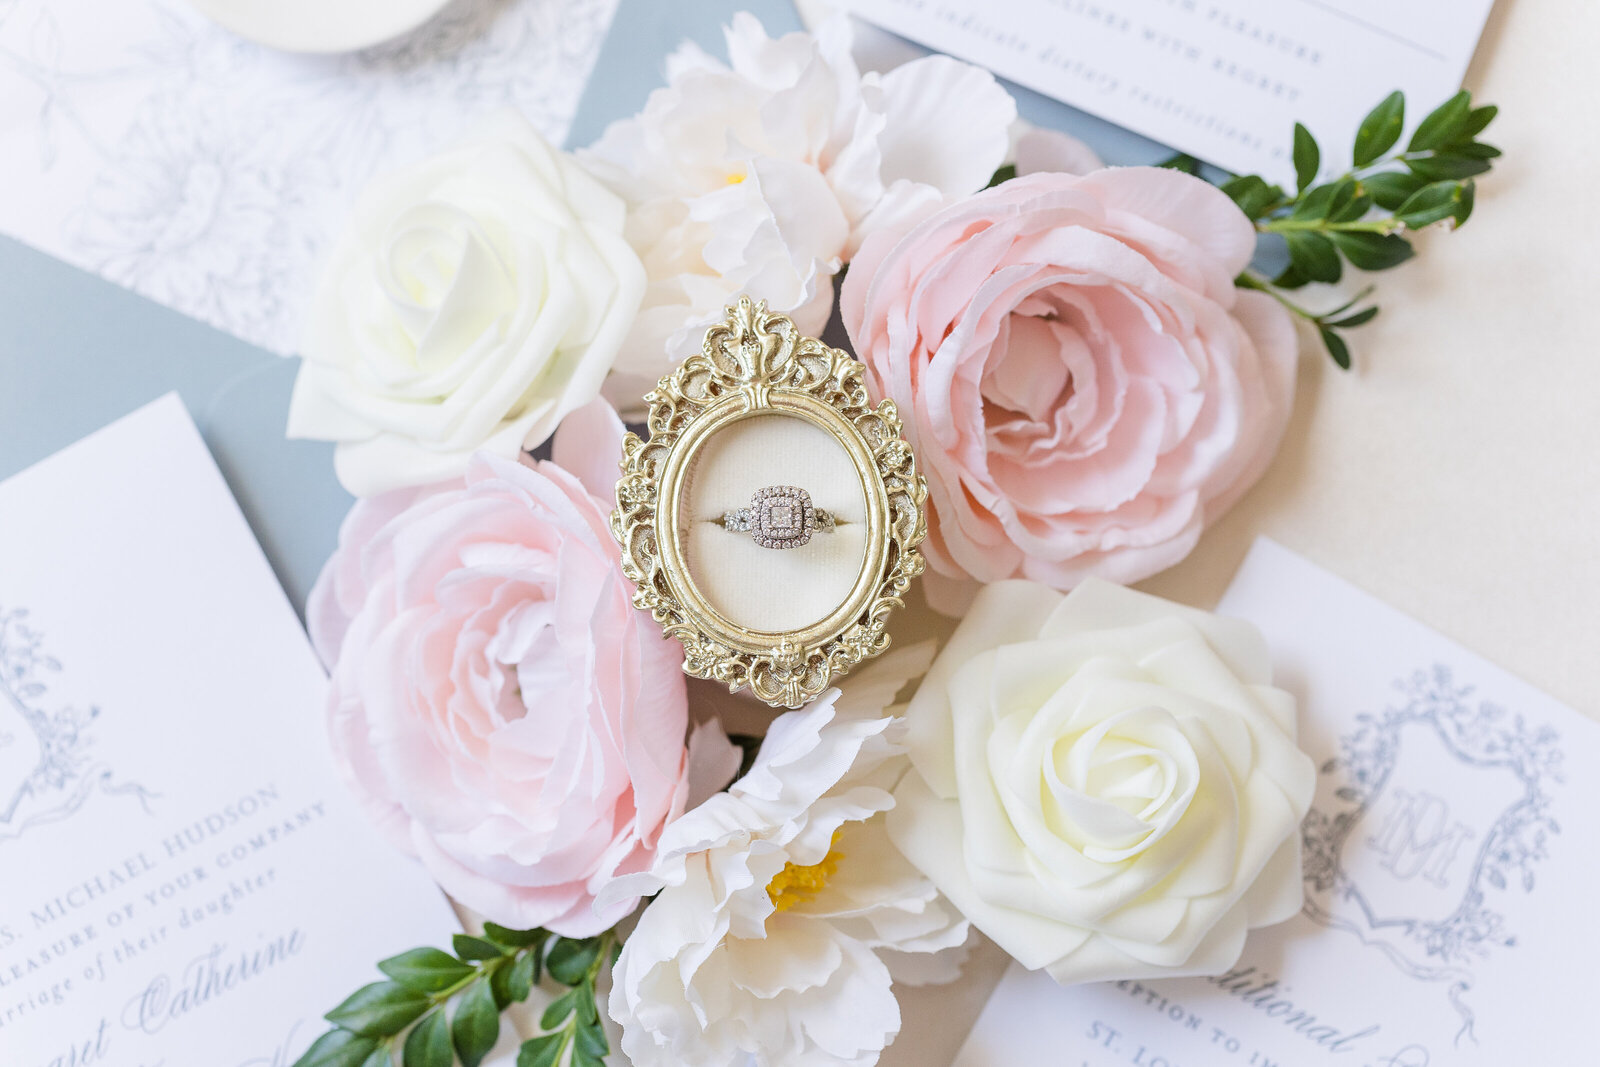 Wedding details photography by Bella Faith Photography